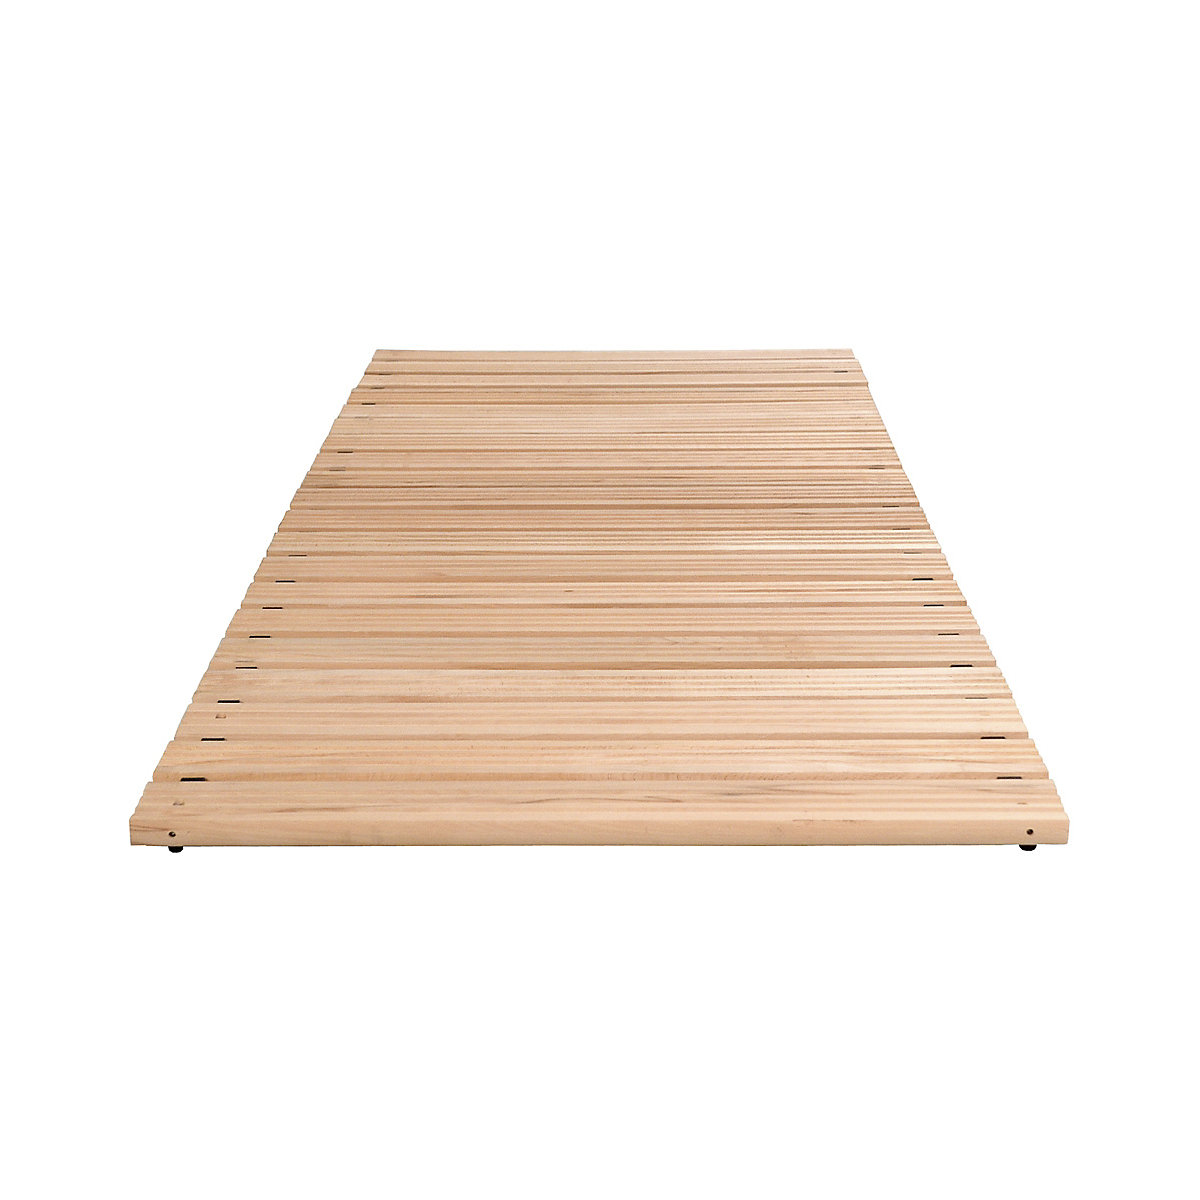 Wooden safety grid, per metre